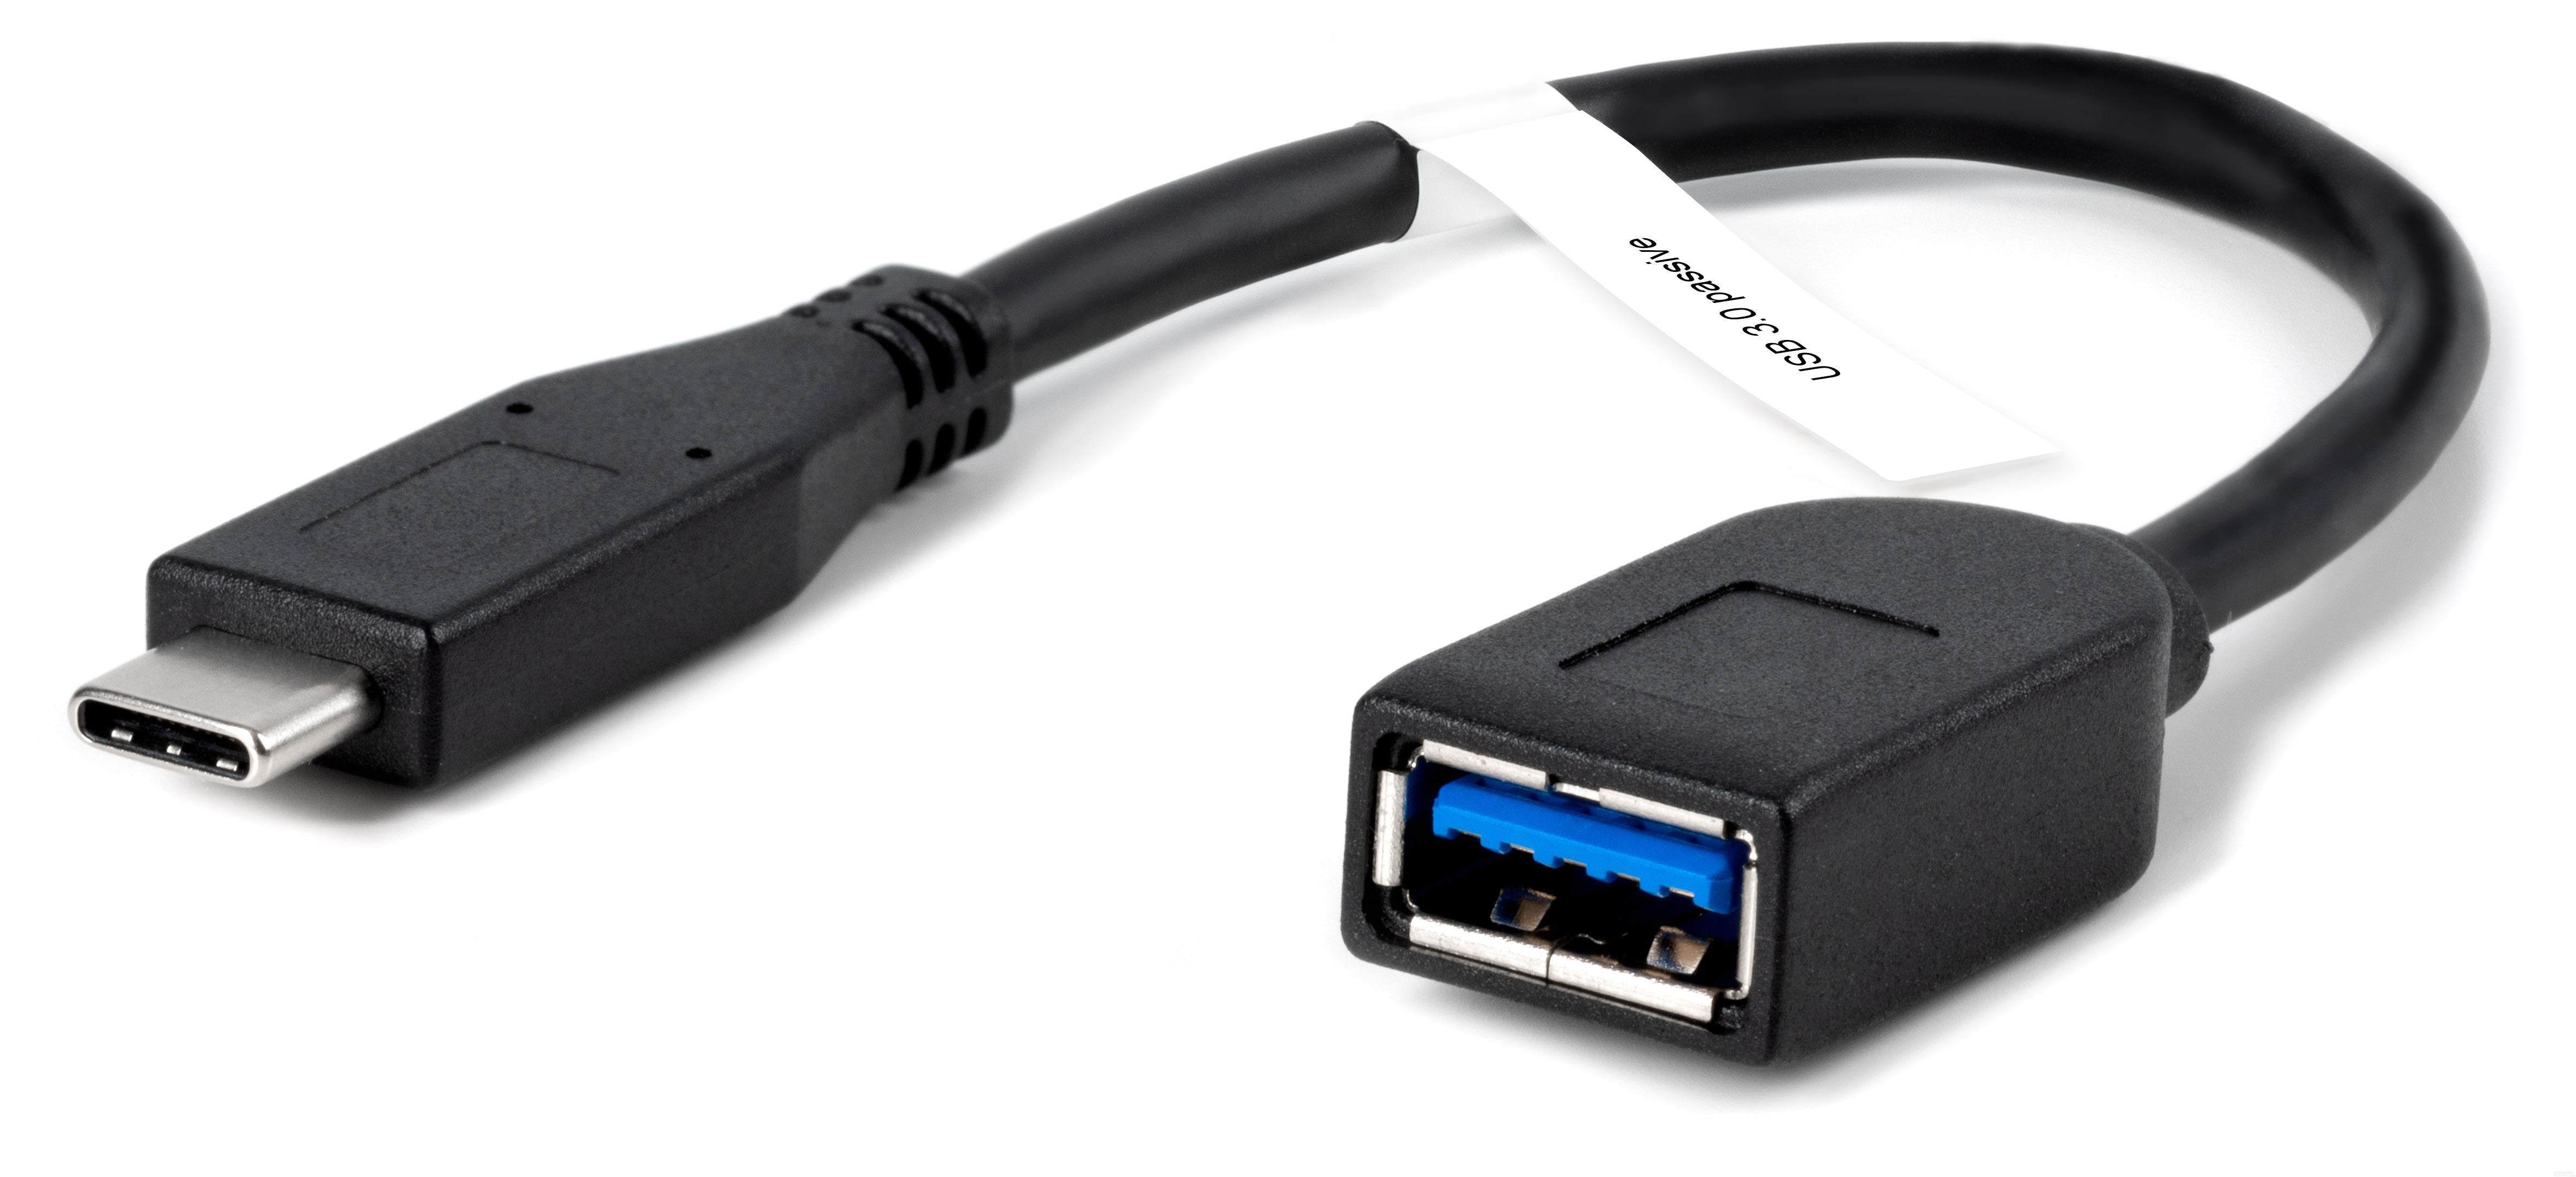 Plugable USB 3.0 Type-A to Type-C Cable (150 mm/6 in length) – Plugable Technologies